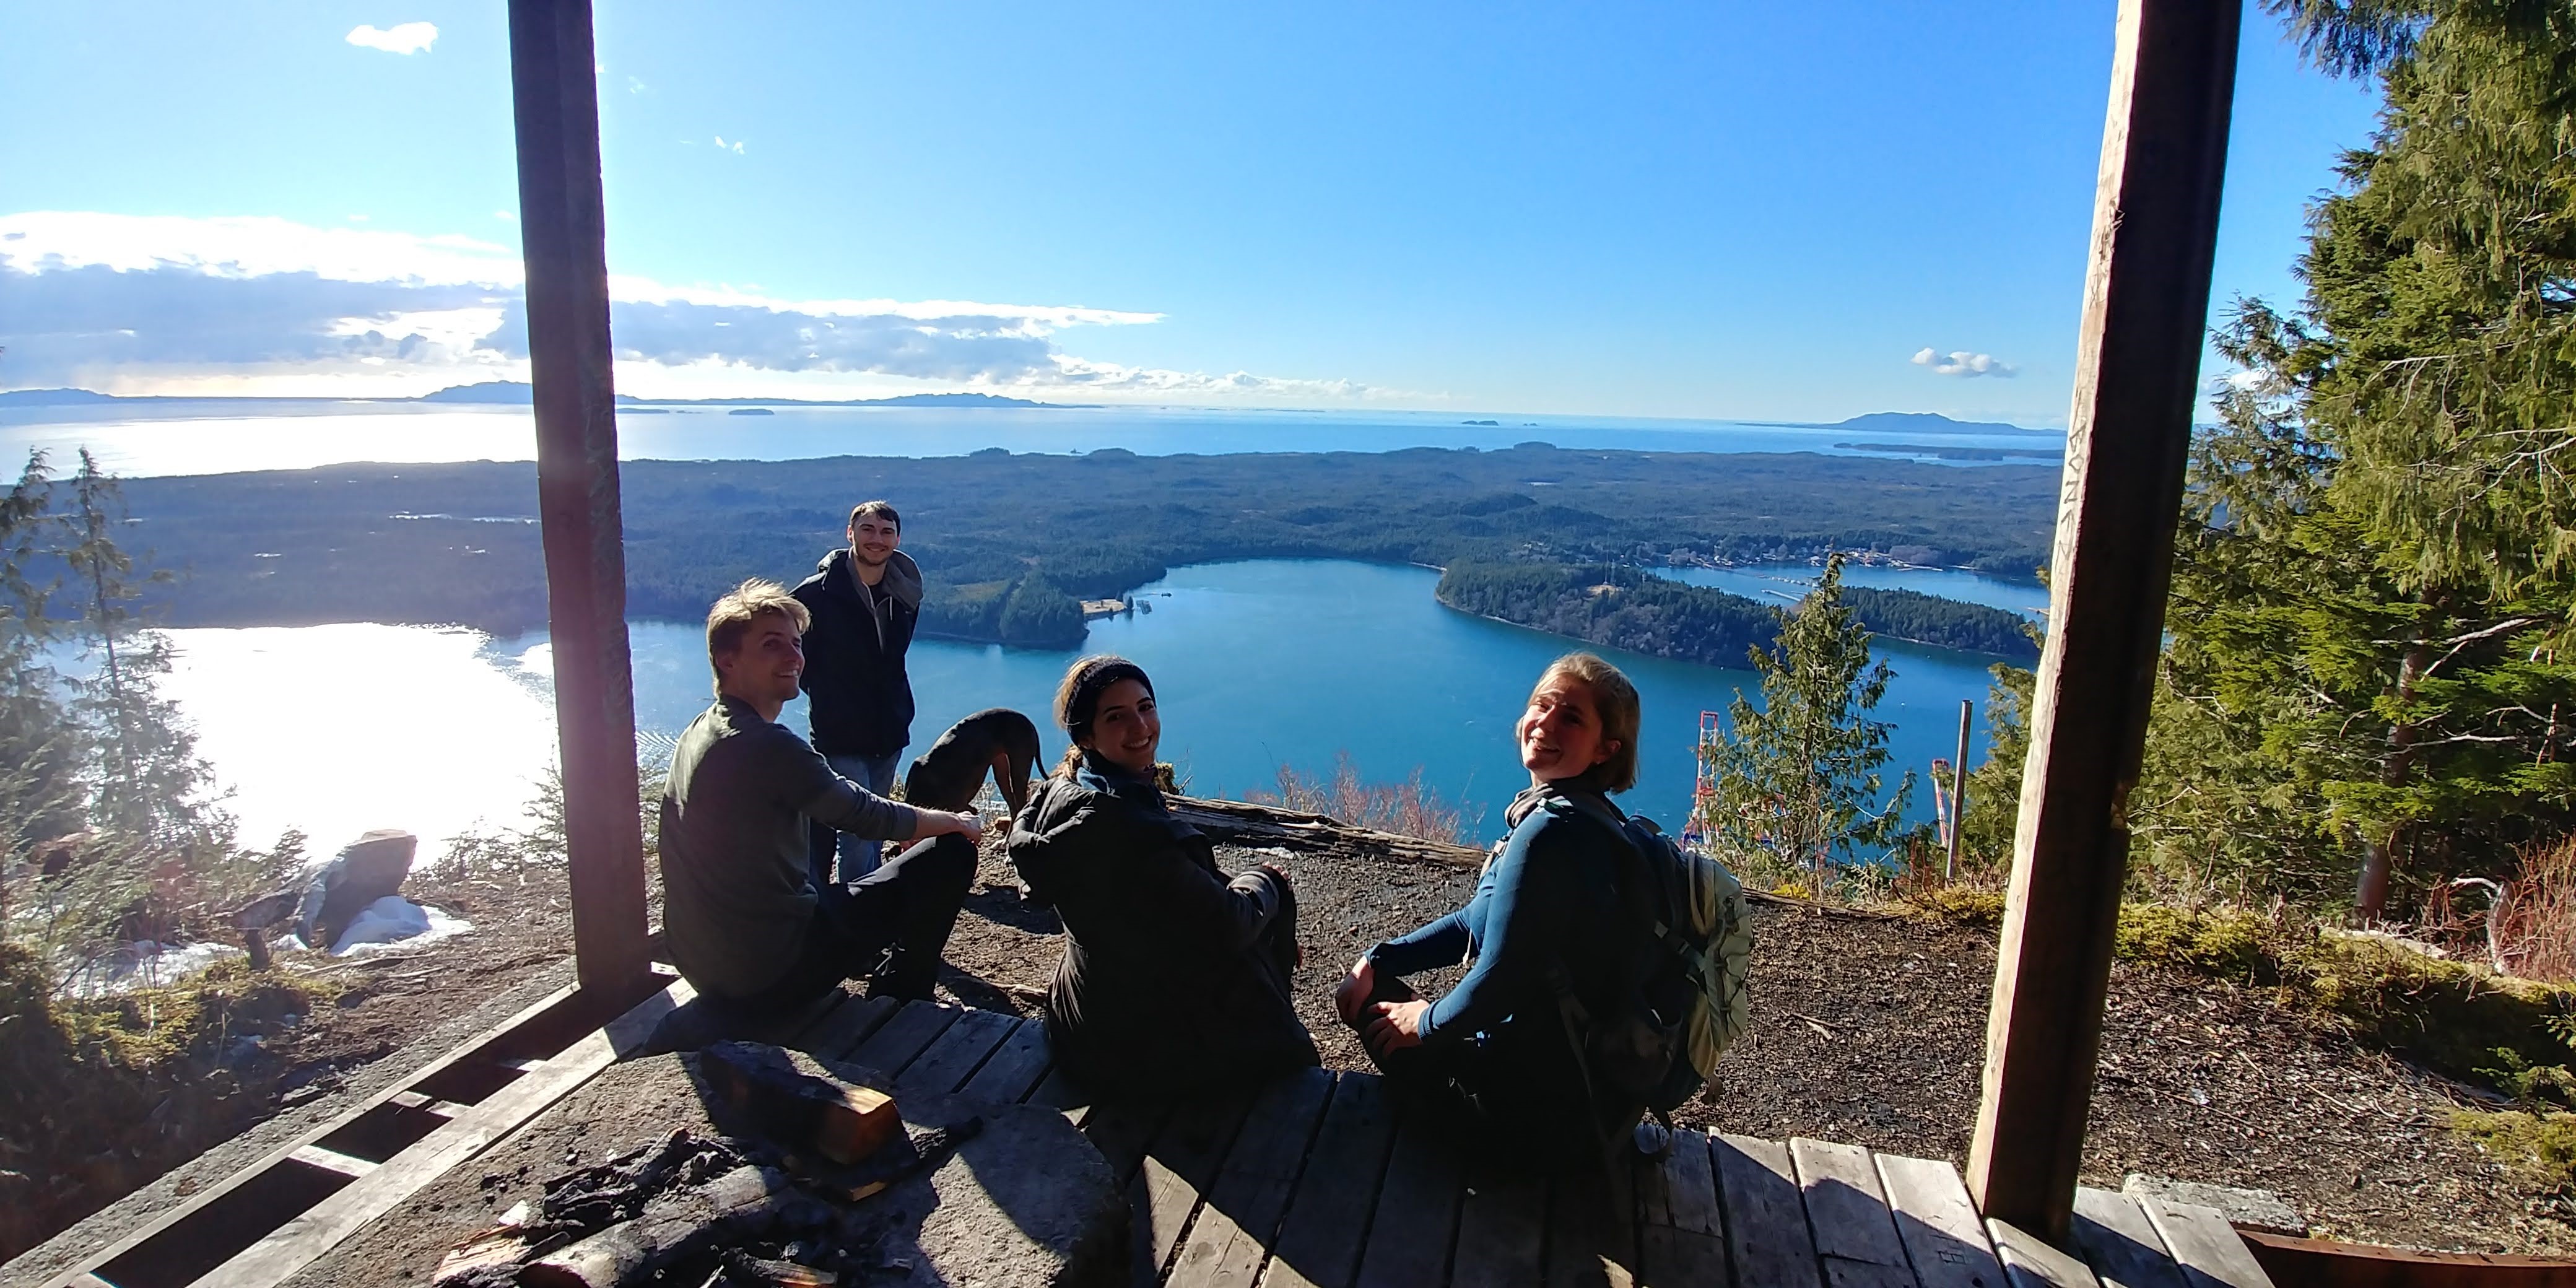 Cohort 2 project coordinators and project supervisor enjoying the view from Mount Hays Spring 2019